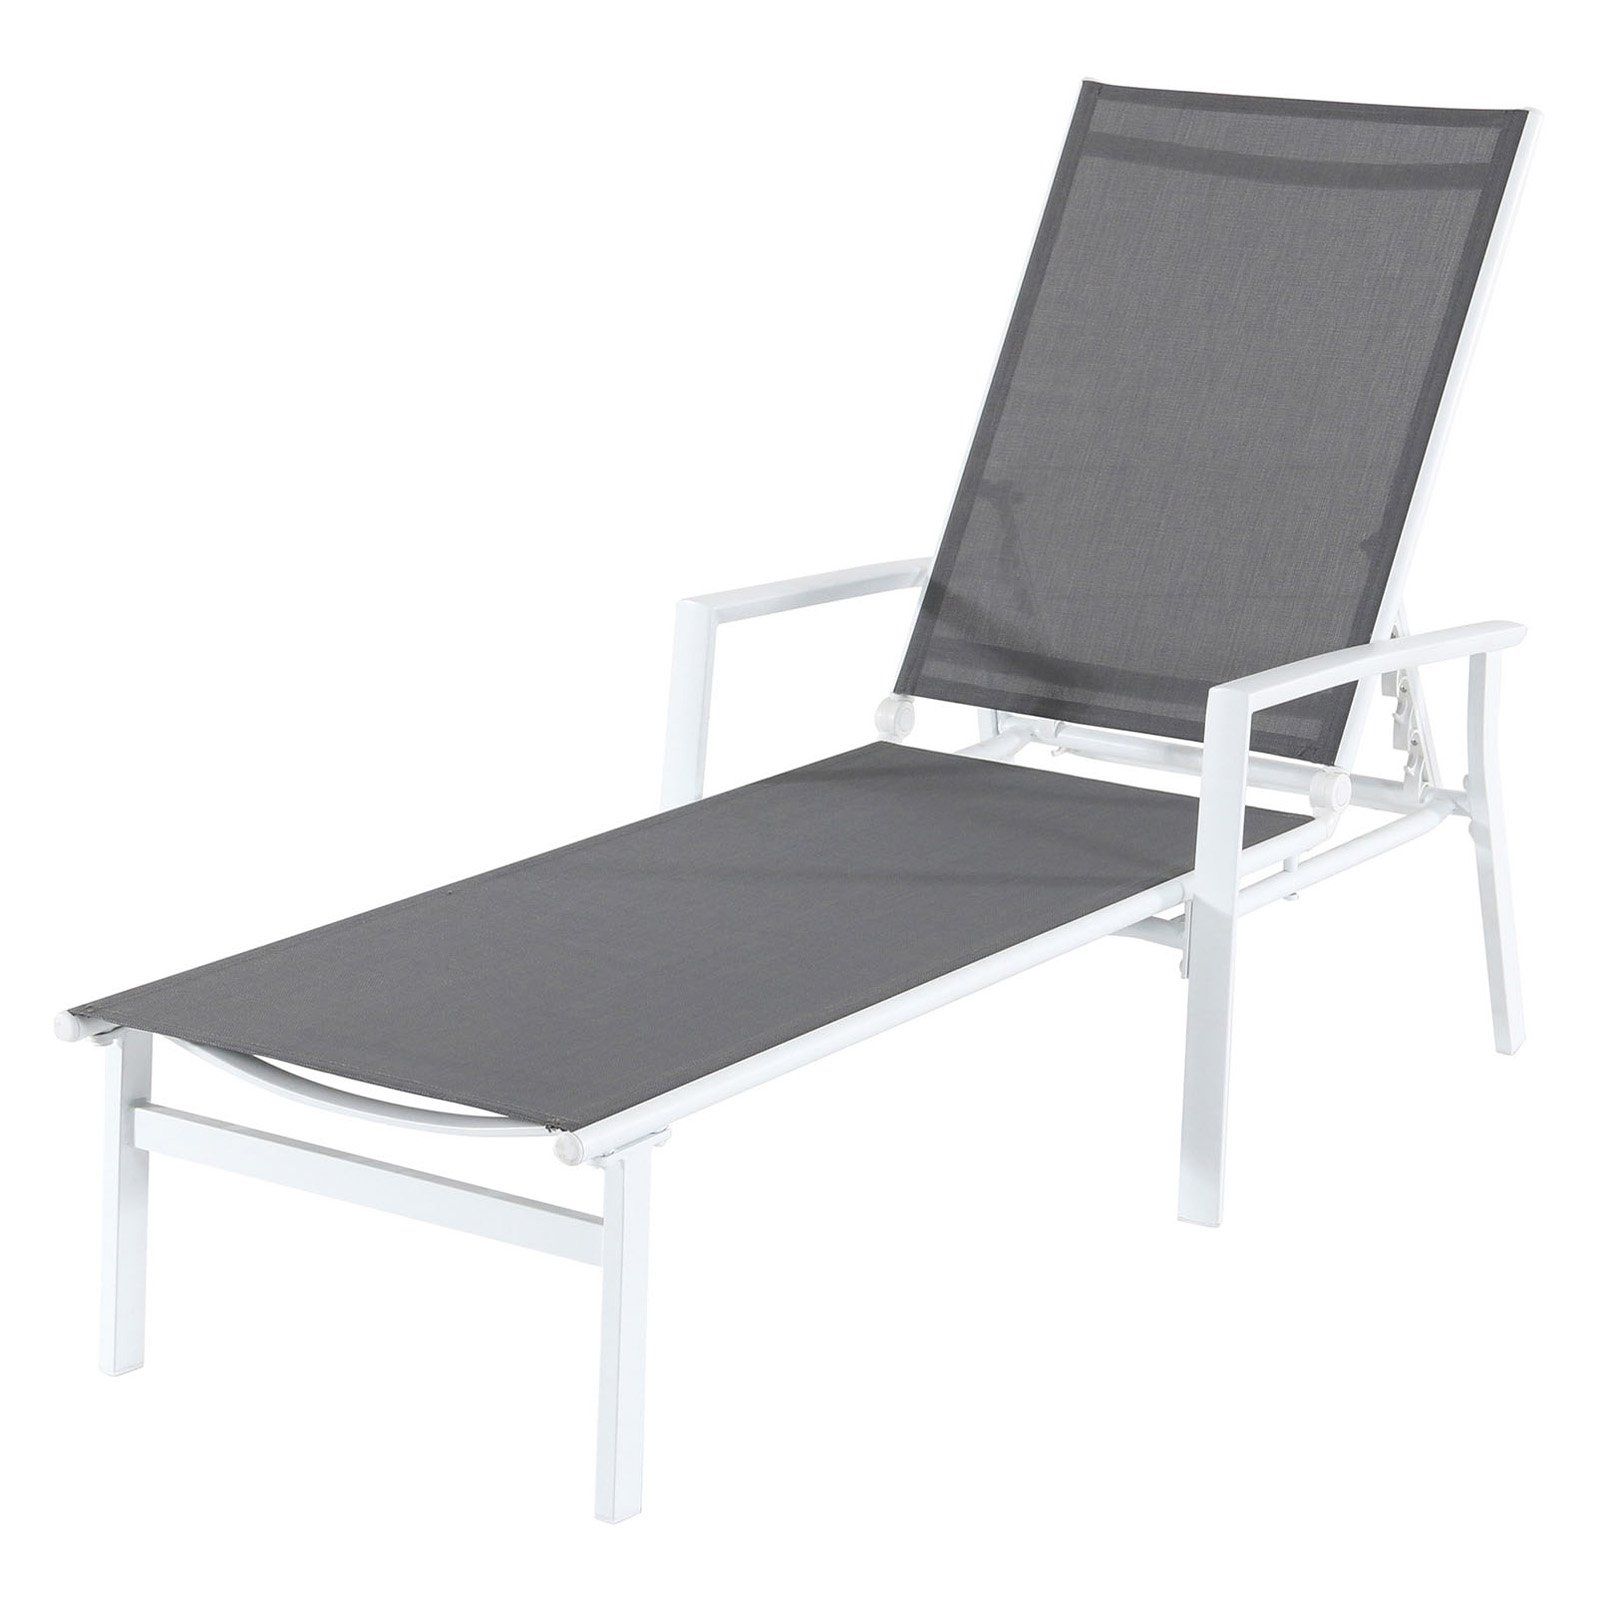 Preferred Salton Outdoor Chaise Lounges For Outdoor Cambridge Nova Sling Adjustable Chaise Lounge Gray (View 24 of 25)